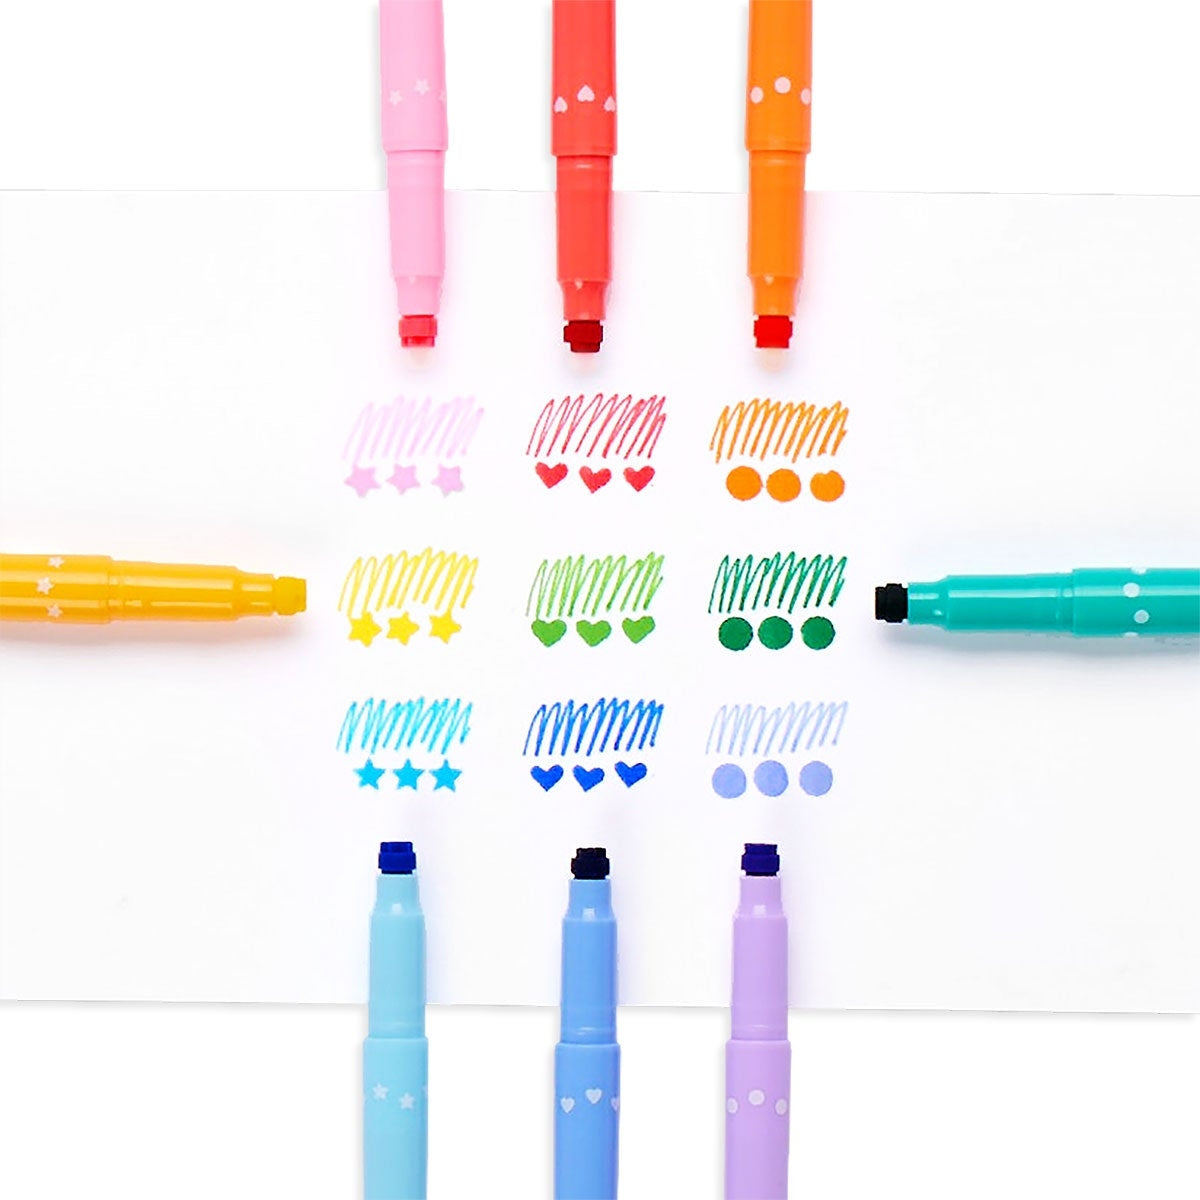 Image of box of double ended markers in a rainbow of 9 colors. Stamp ends – pink stars, red hearts, orange circles, yellow stars, green hearts, green dots, blue stars, blue hearts, purple dots. 